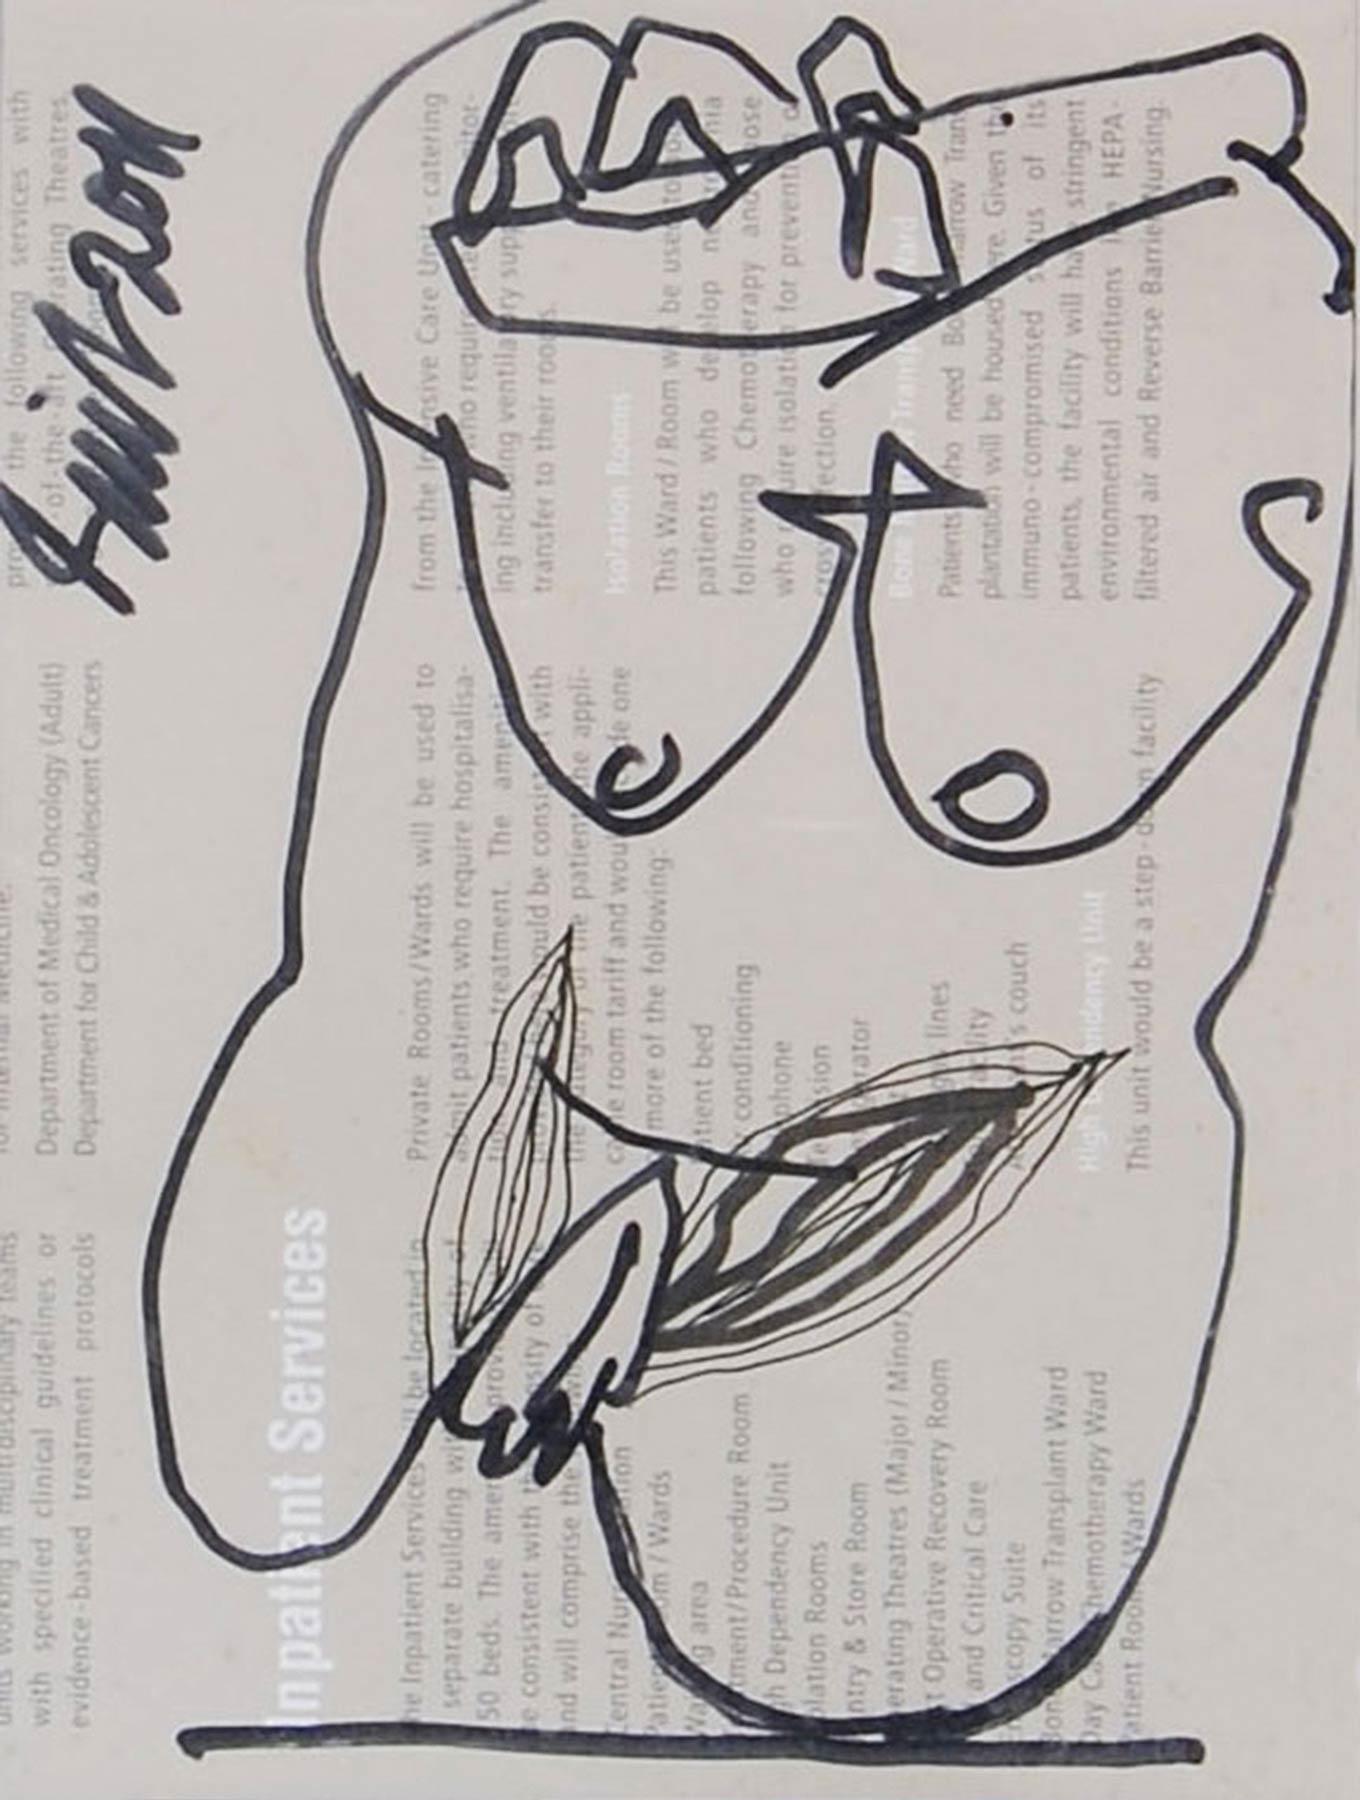 Erotic Series III, Nude Female Drawing, Ink on Magazine Paper "In Stock"